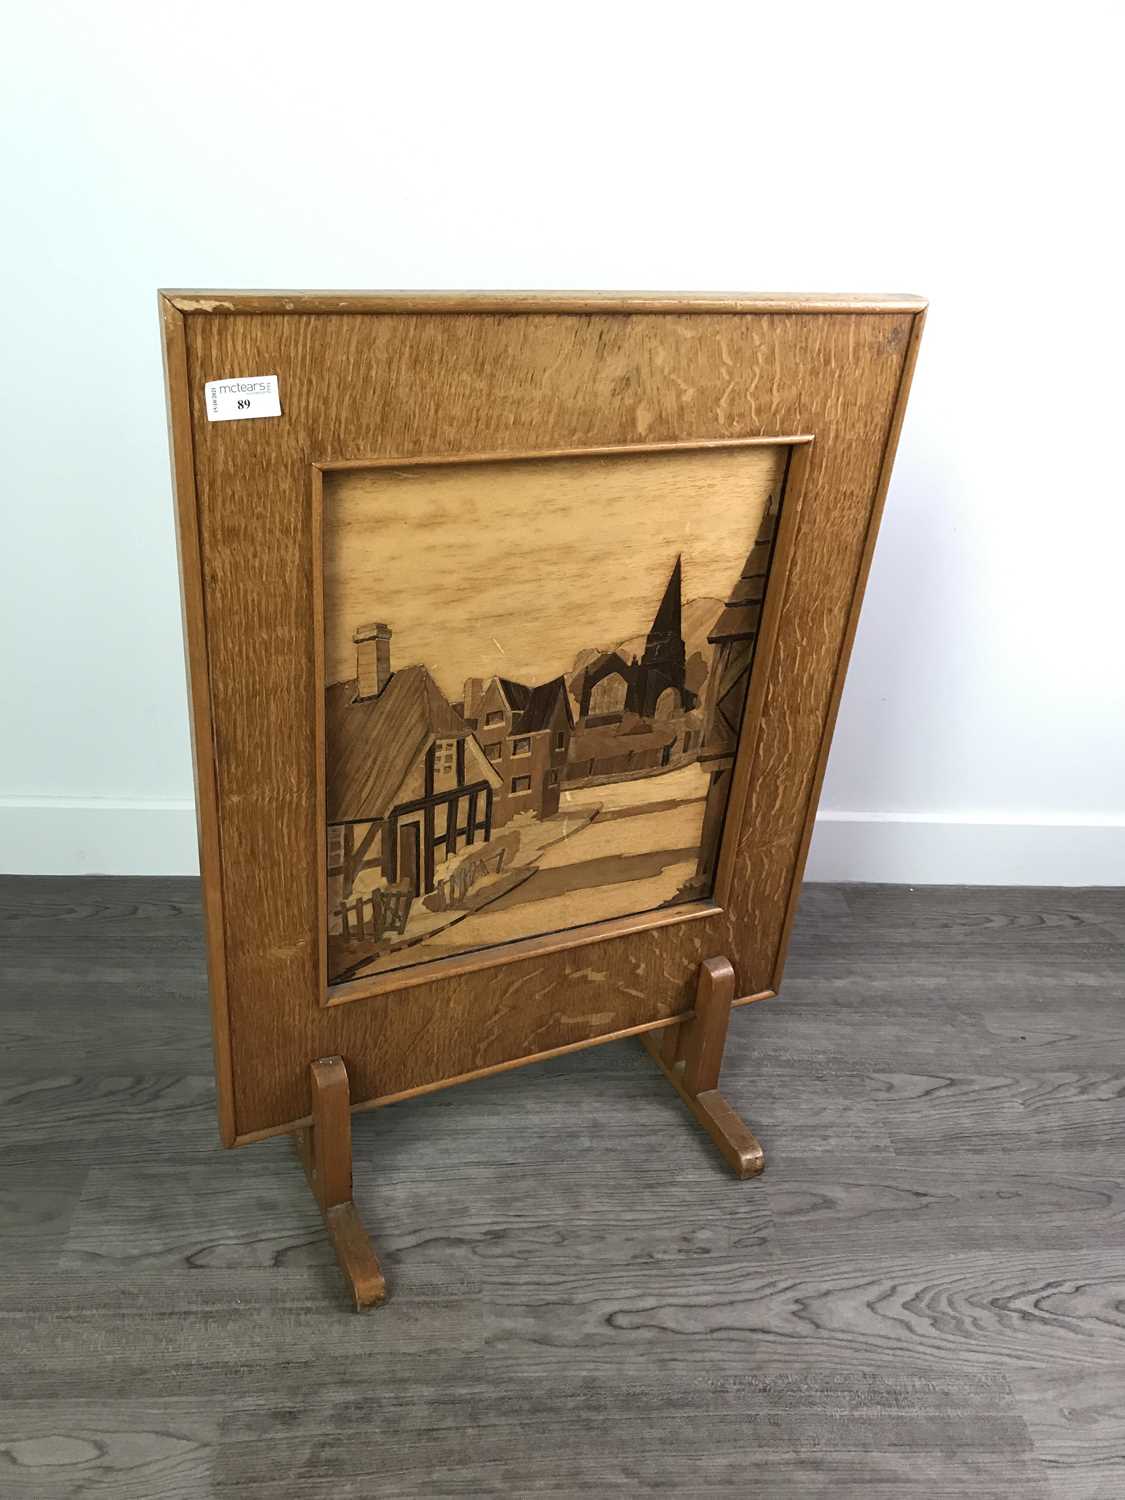 Lot 89 - A MARQUETRY FIRE SCREEN ALONG WITH A SERVING TRAY